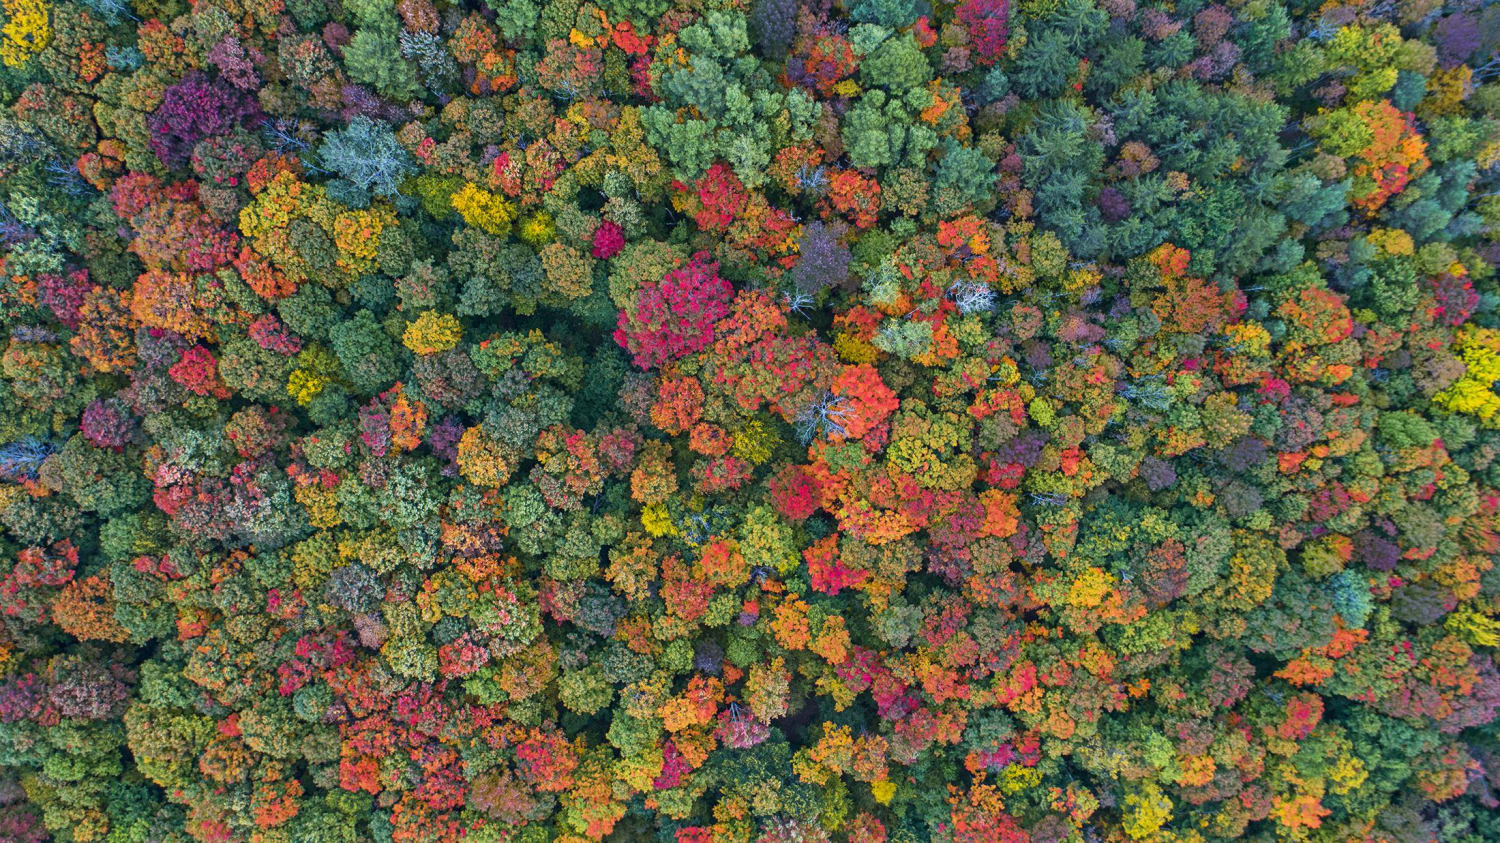 Rainbow Broccoli Forest. Fall in the Finger Lakes of upstate New York